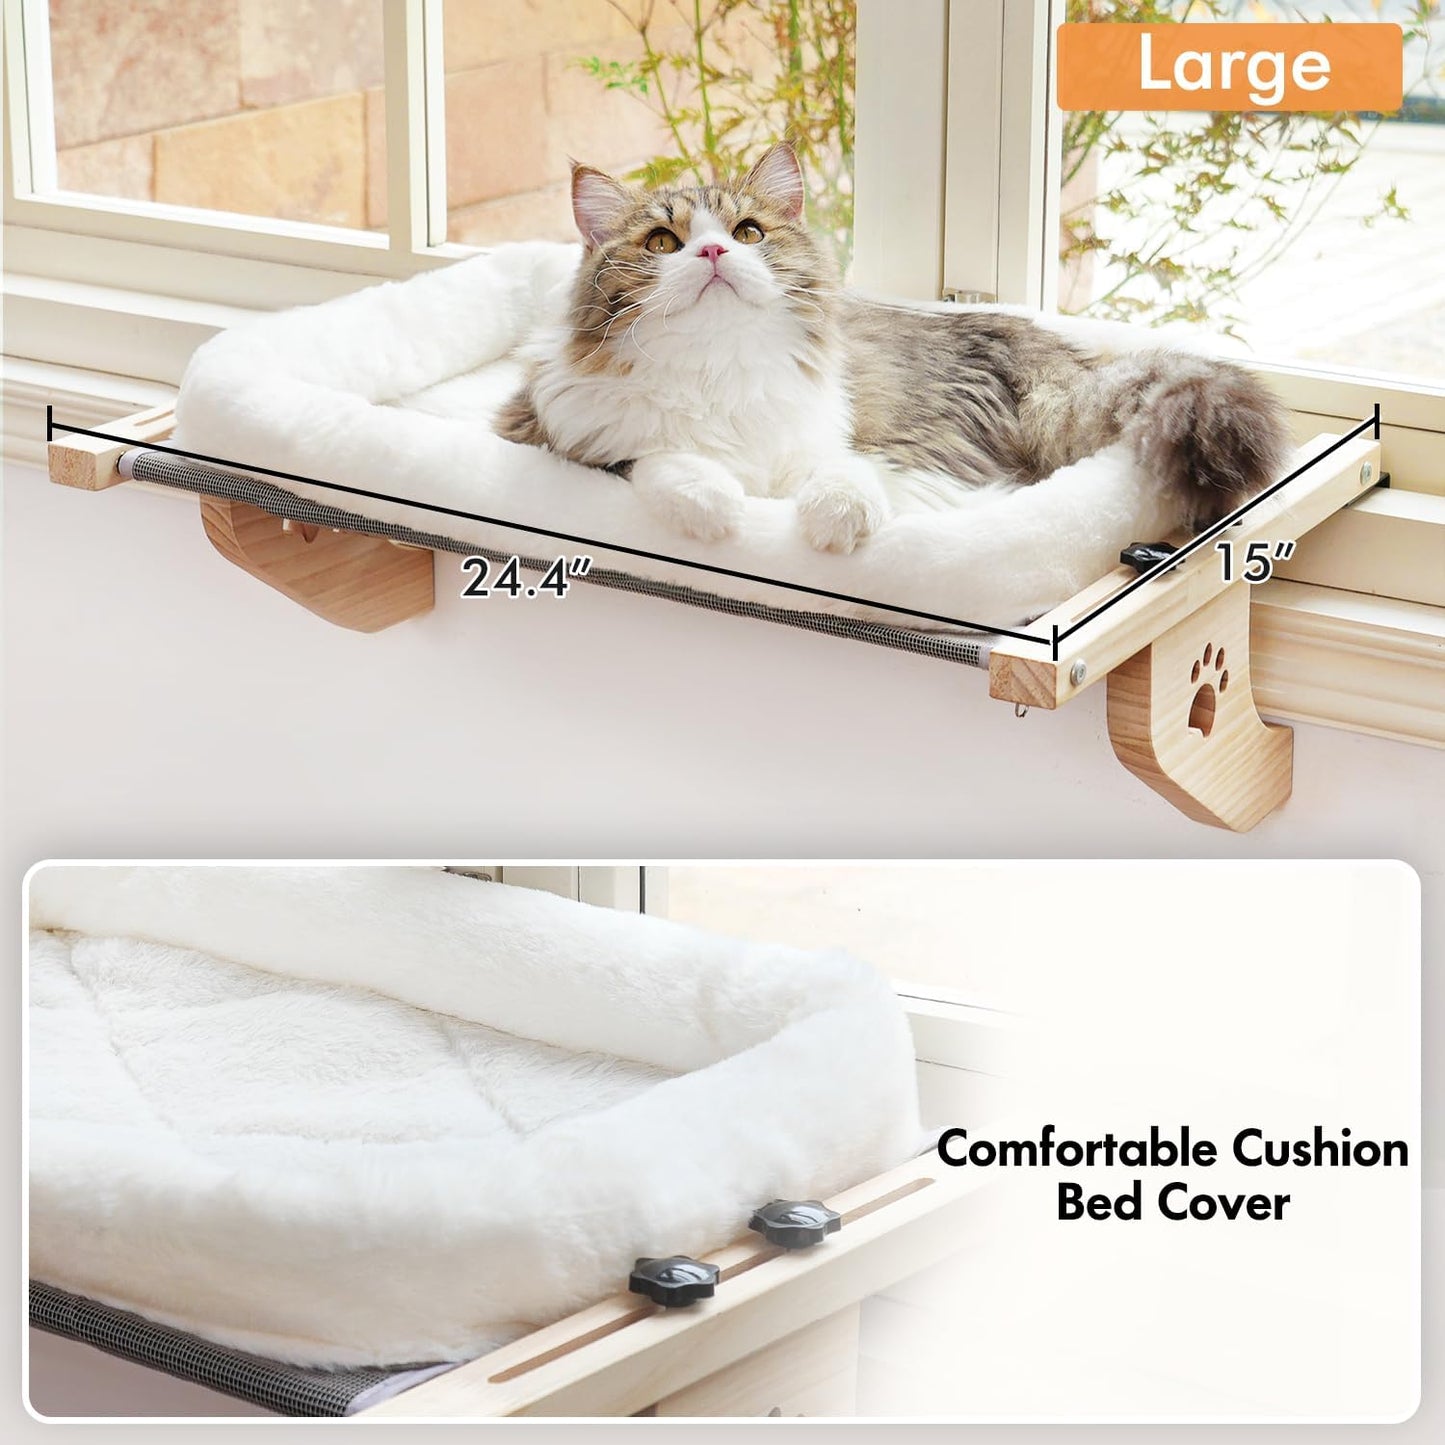 AMOSIJOY Cat Sill Window Perch Sturdy Cat Hammock Window Seat with Cushion Bed Cover, Wood & Metal Frame for Large Cats, Easy to Adjust Cat Bed for Windowsill, Bedside, Drawer and Cabinet(Cushion Bed)